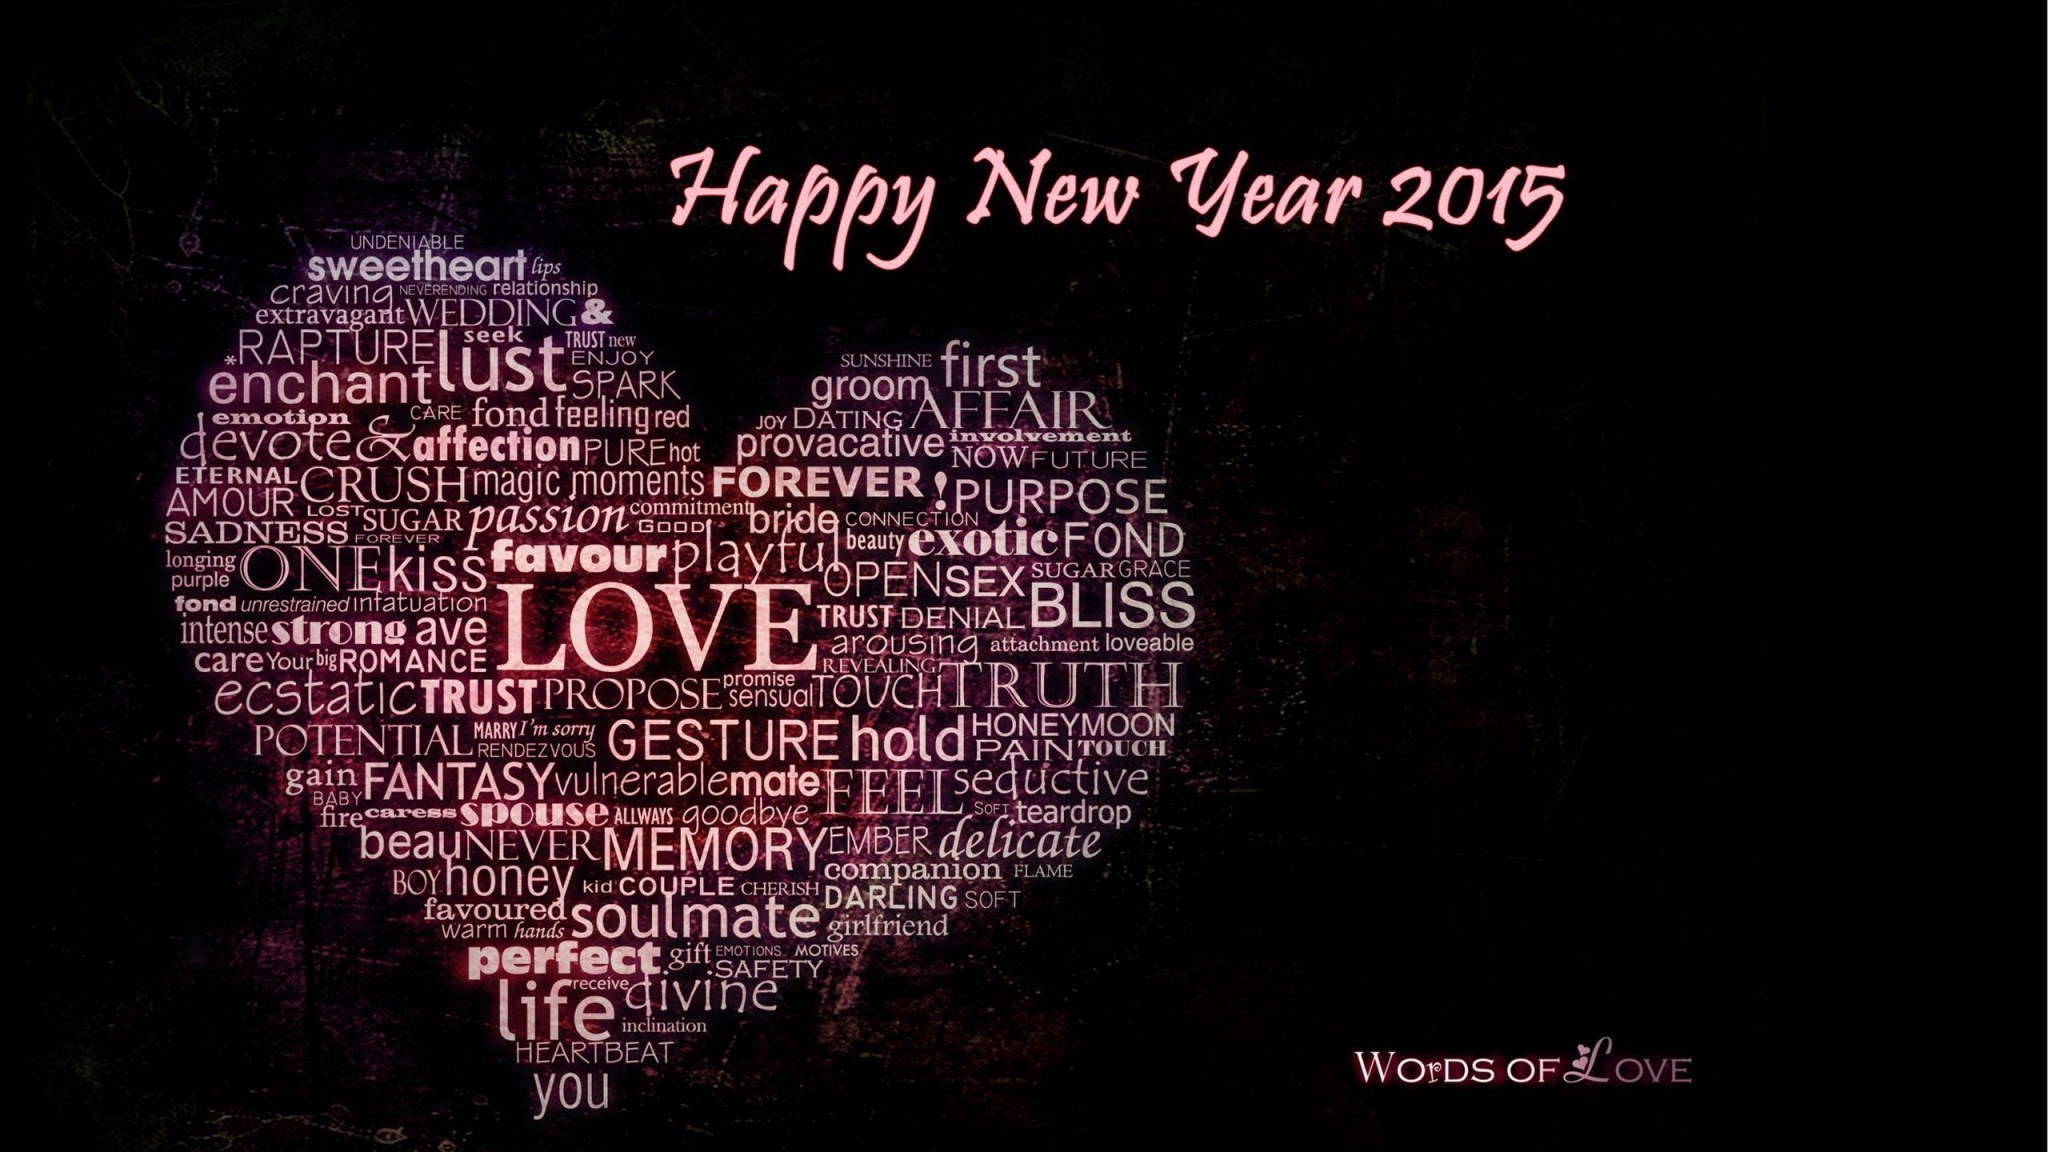 Awesome Sms Happy New Year HD Desktop Wallpaper S Nails